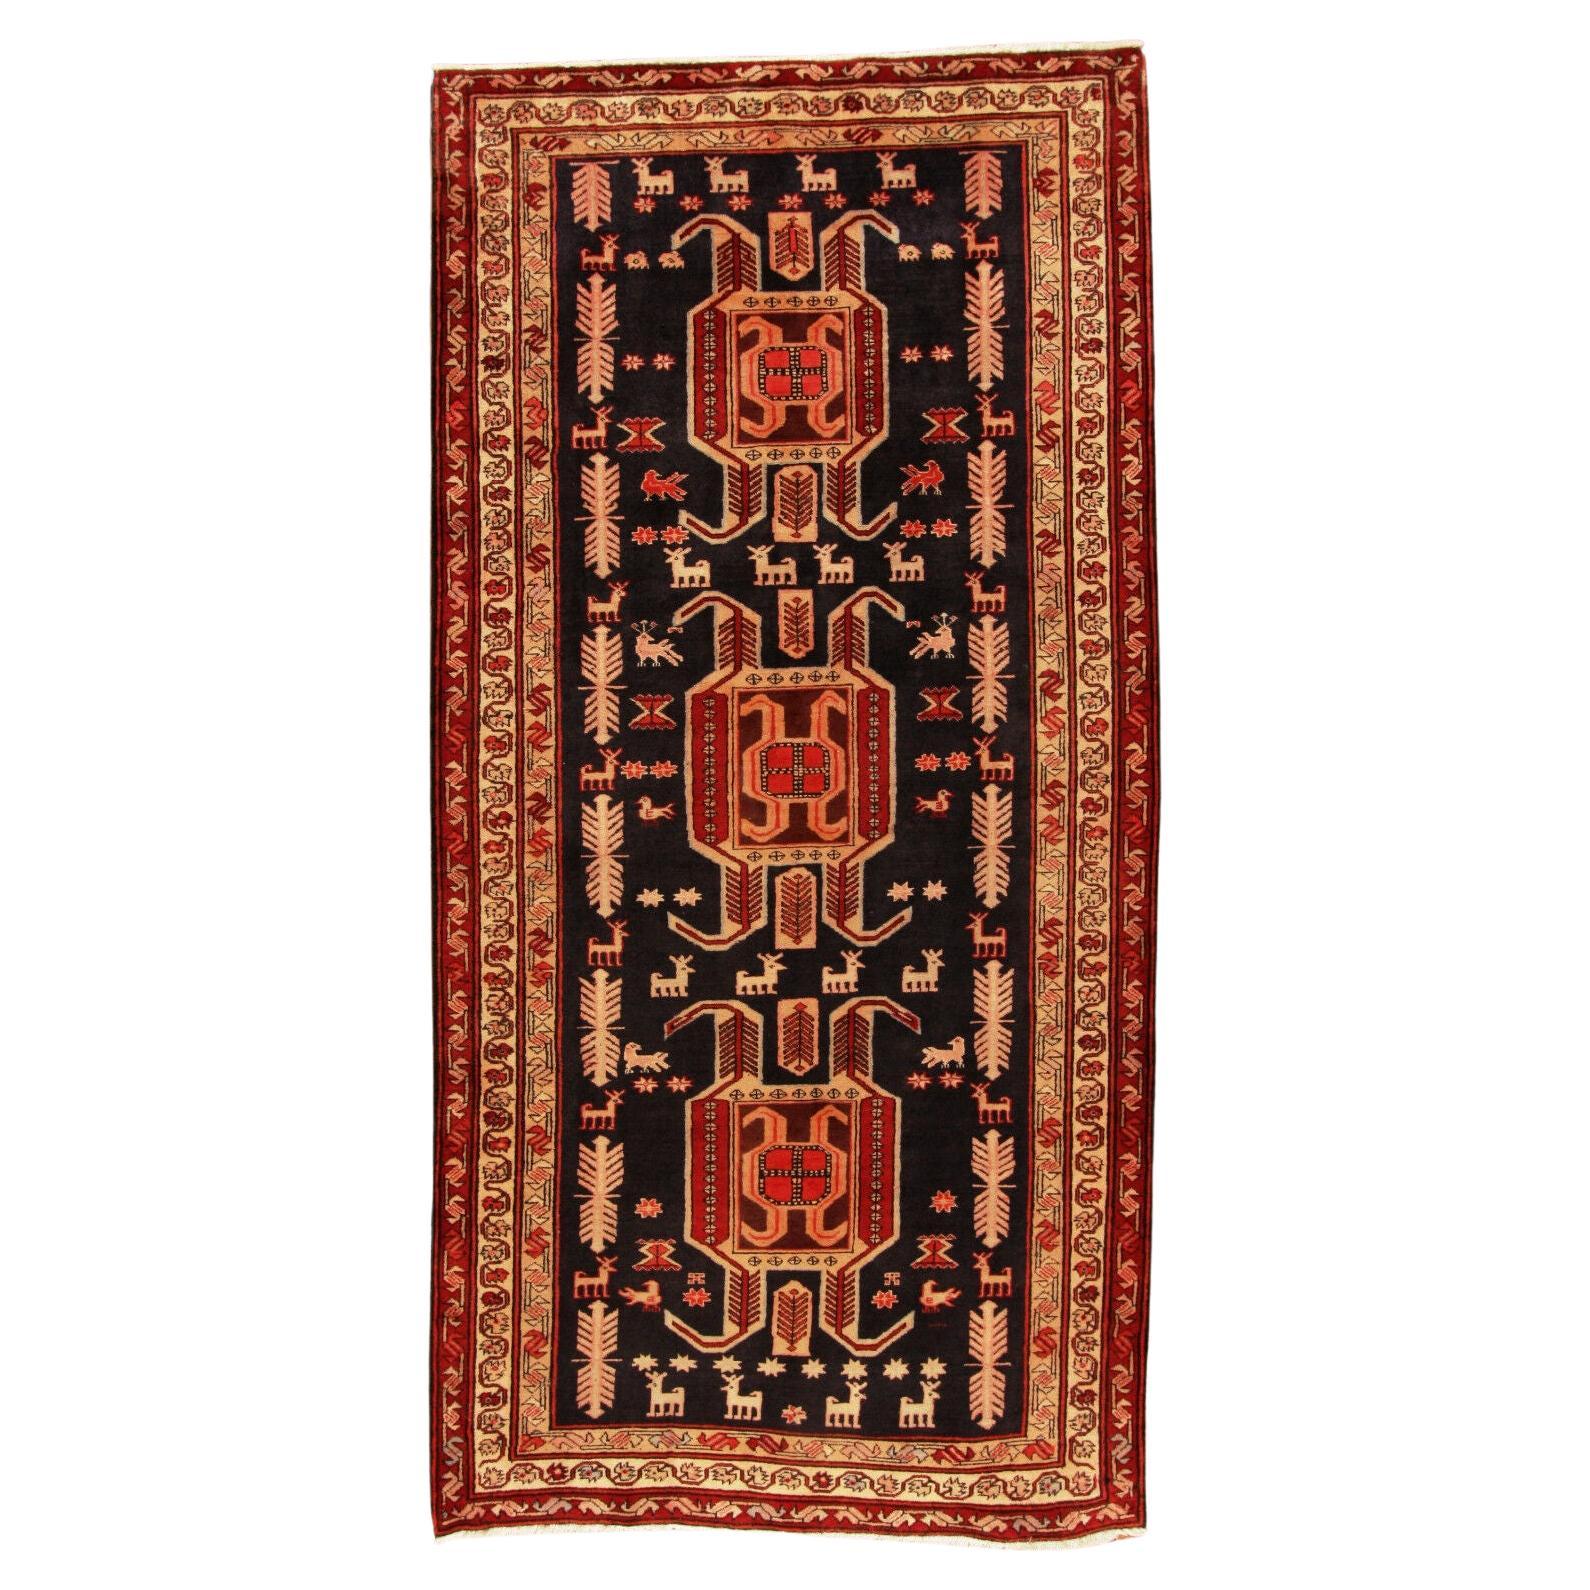 Handmade Vintage Persian Style Malayer Rug 4.5' x 9.2', 1970s - 1T26 For Sale